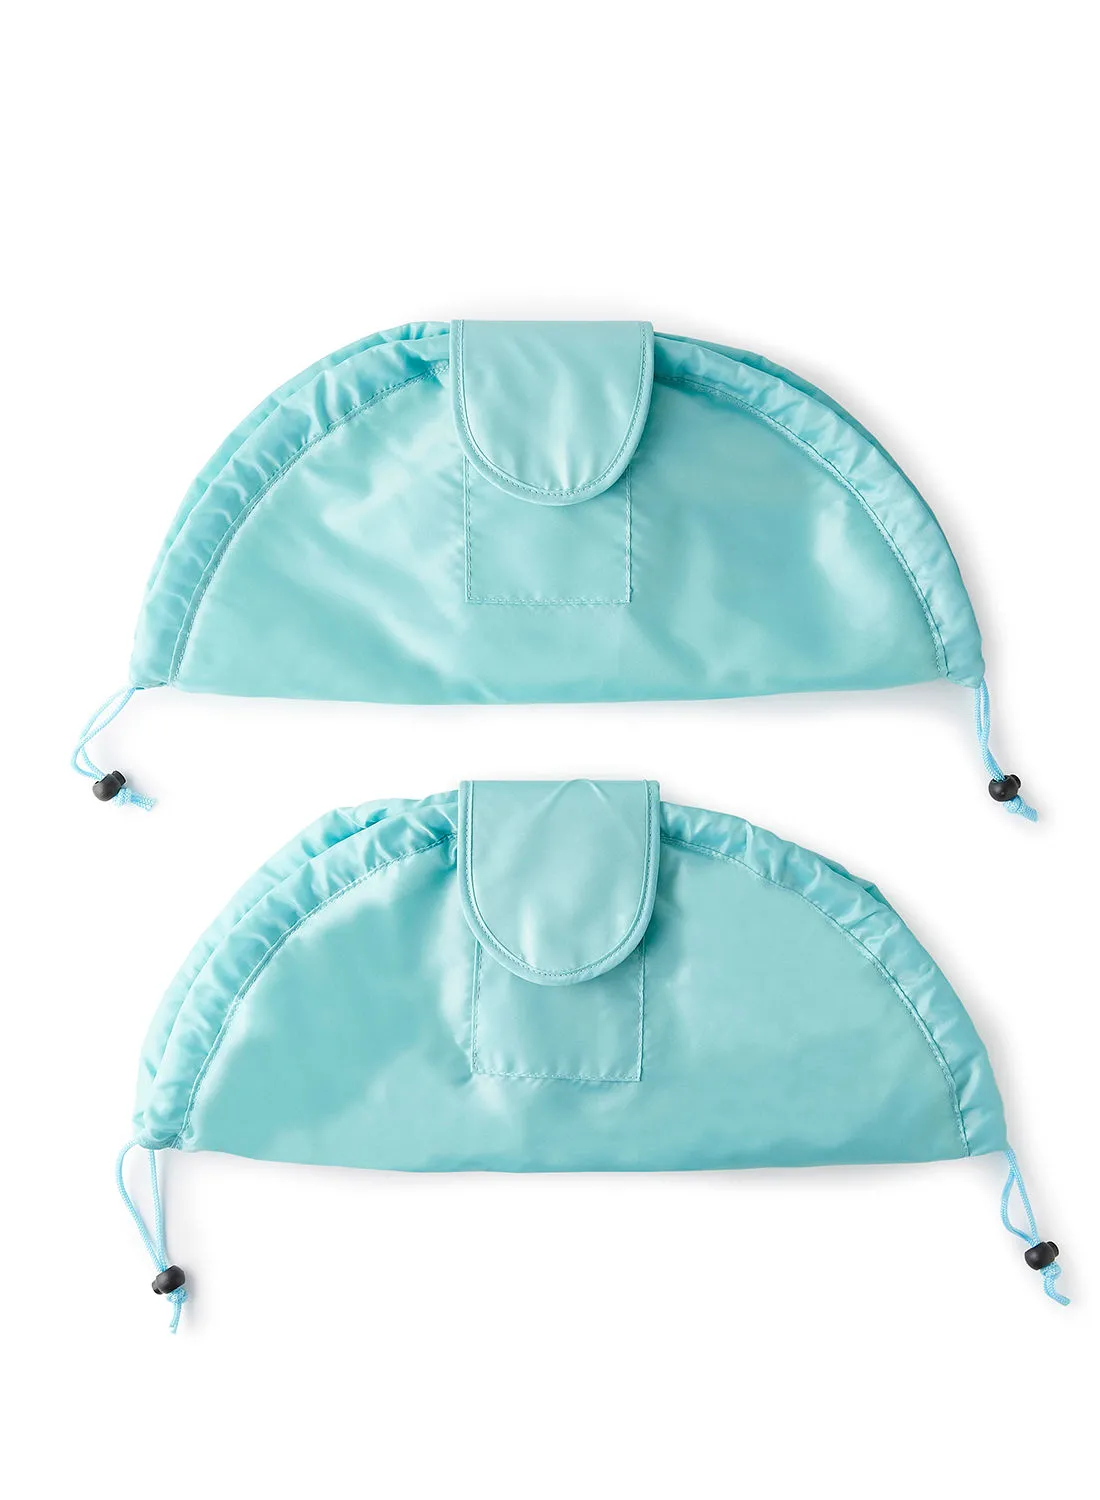 Noon East 2 Pack Cosmetic Bag Light Blue